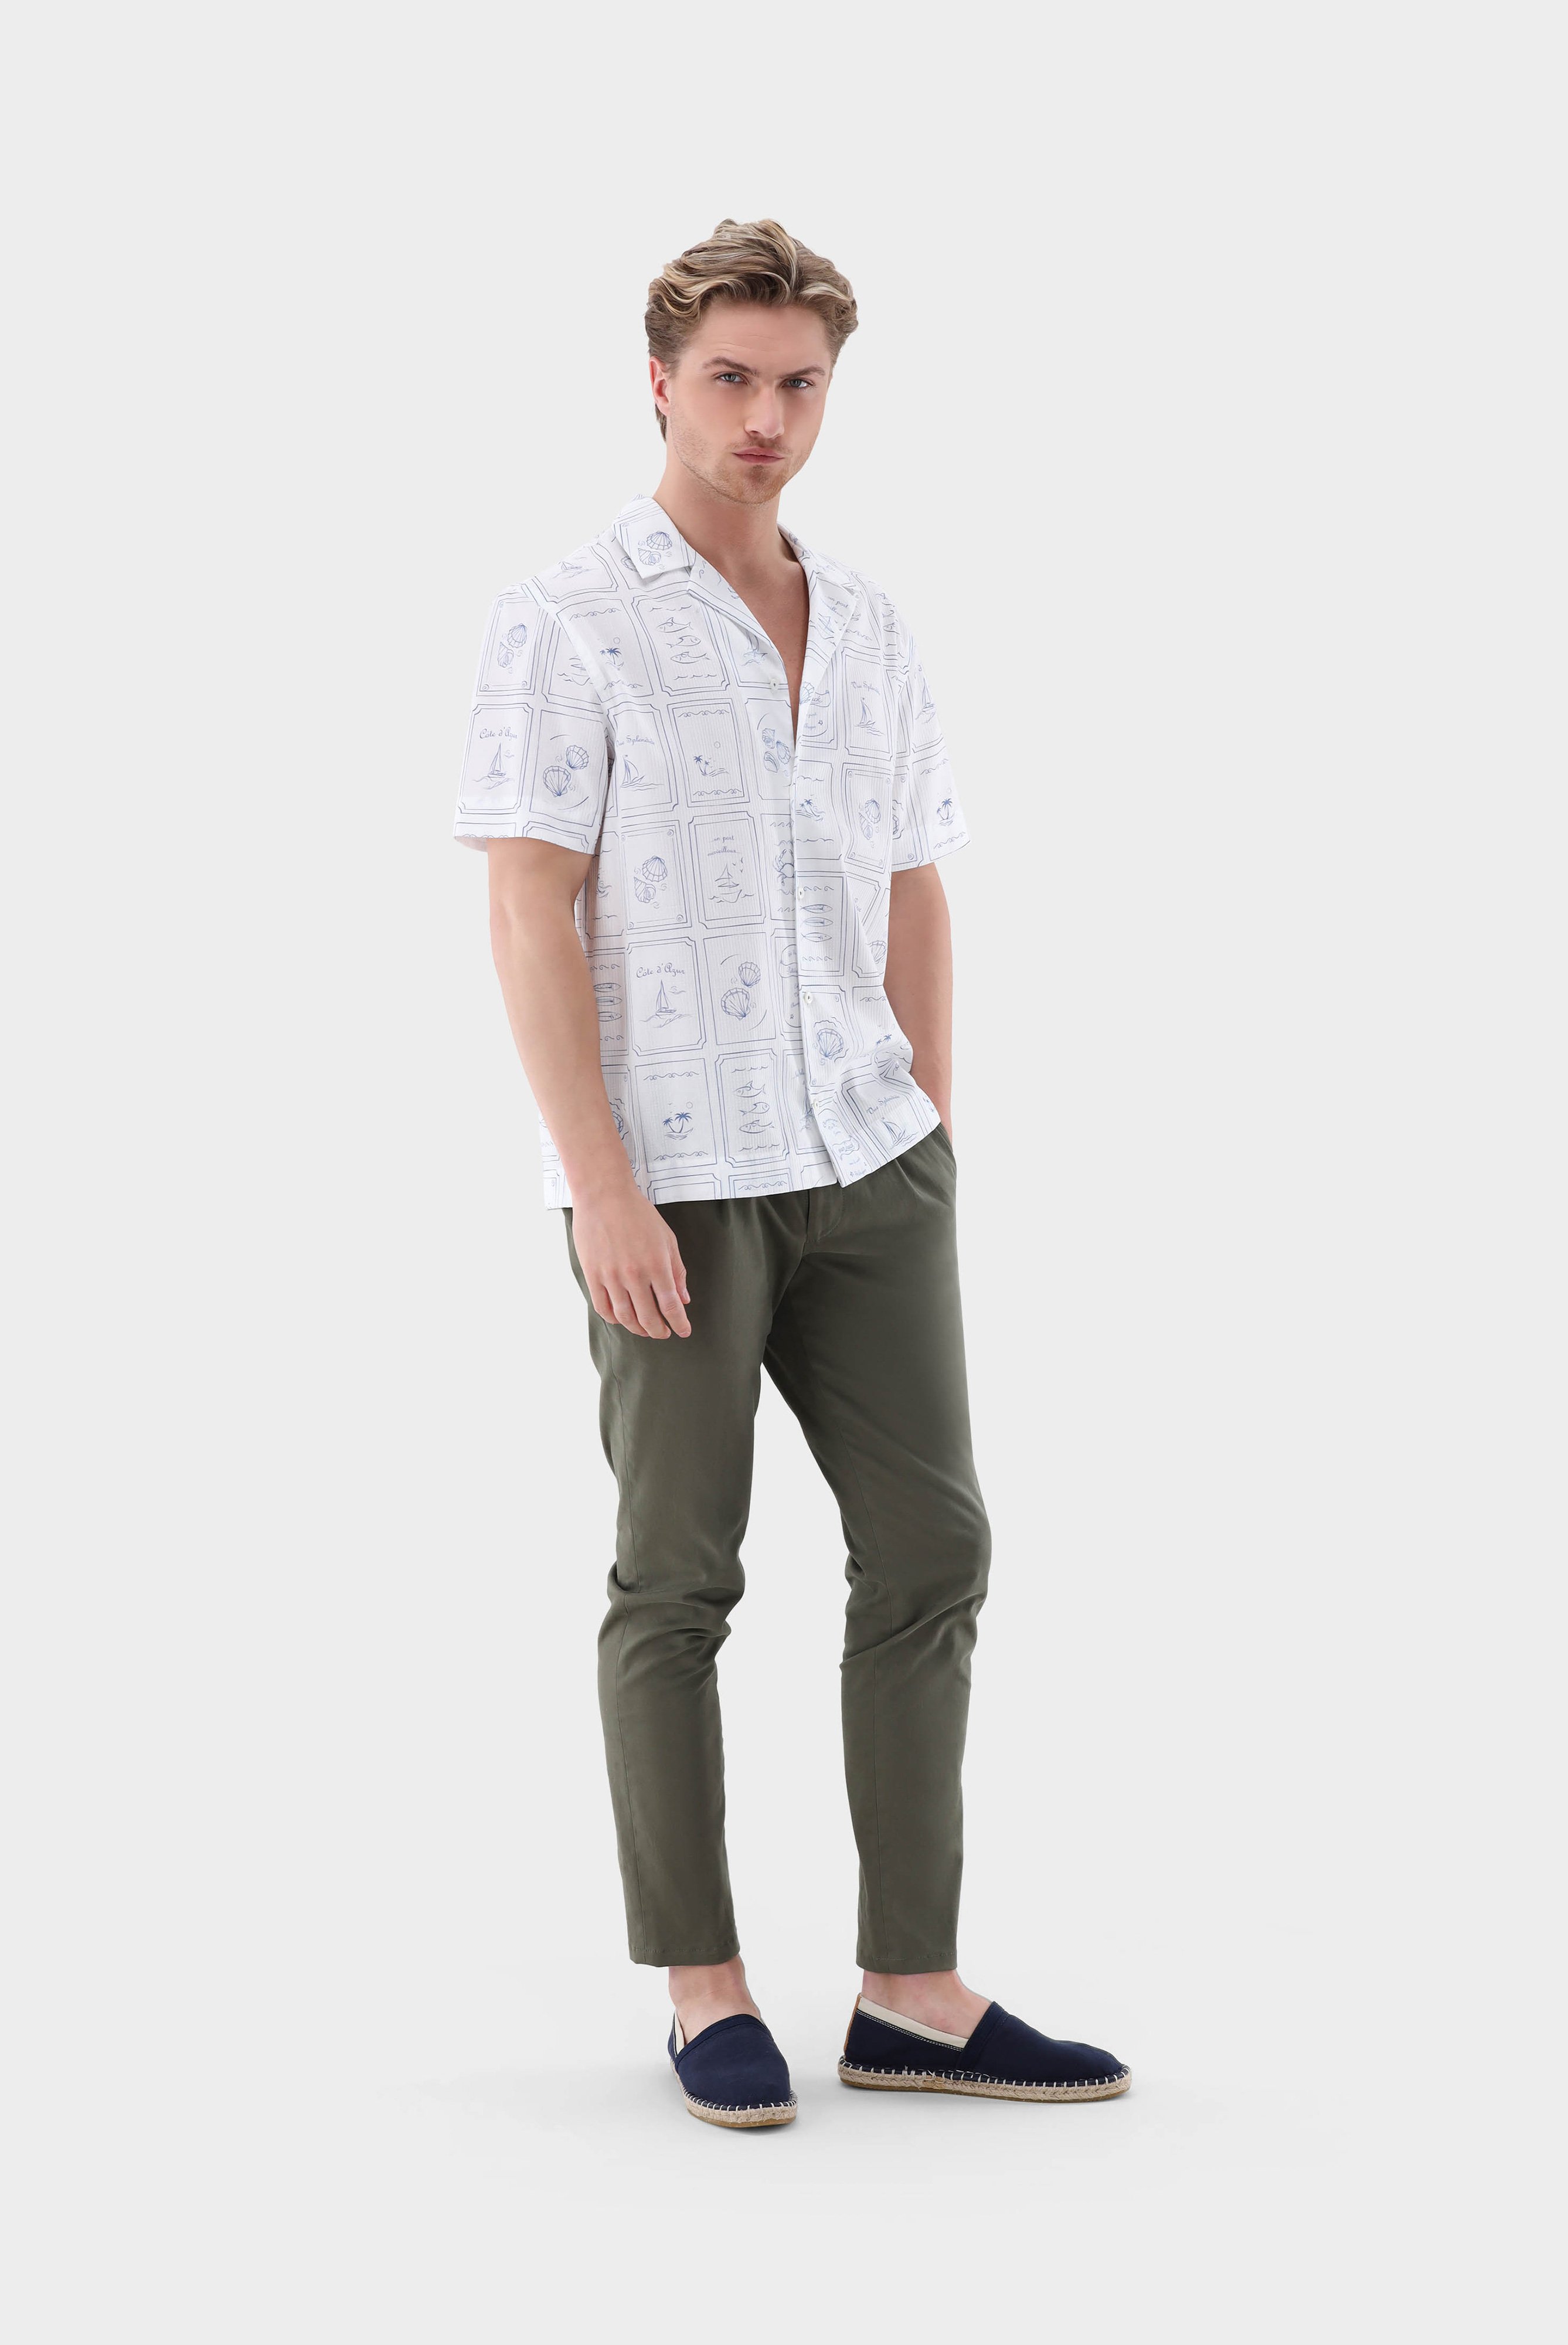 Casual Shirts+Bowling shirt with print+20.2075.RD.172041.007.S